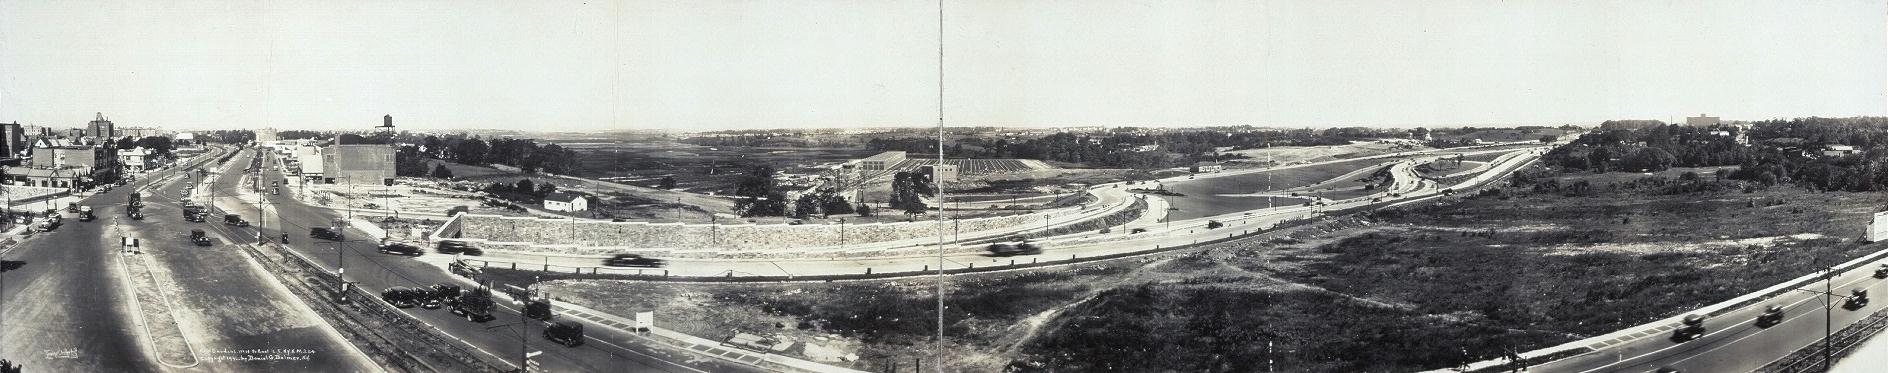 Panoramic View of Queens Boulevard, Kew Gardens, NY.